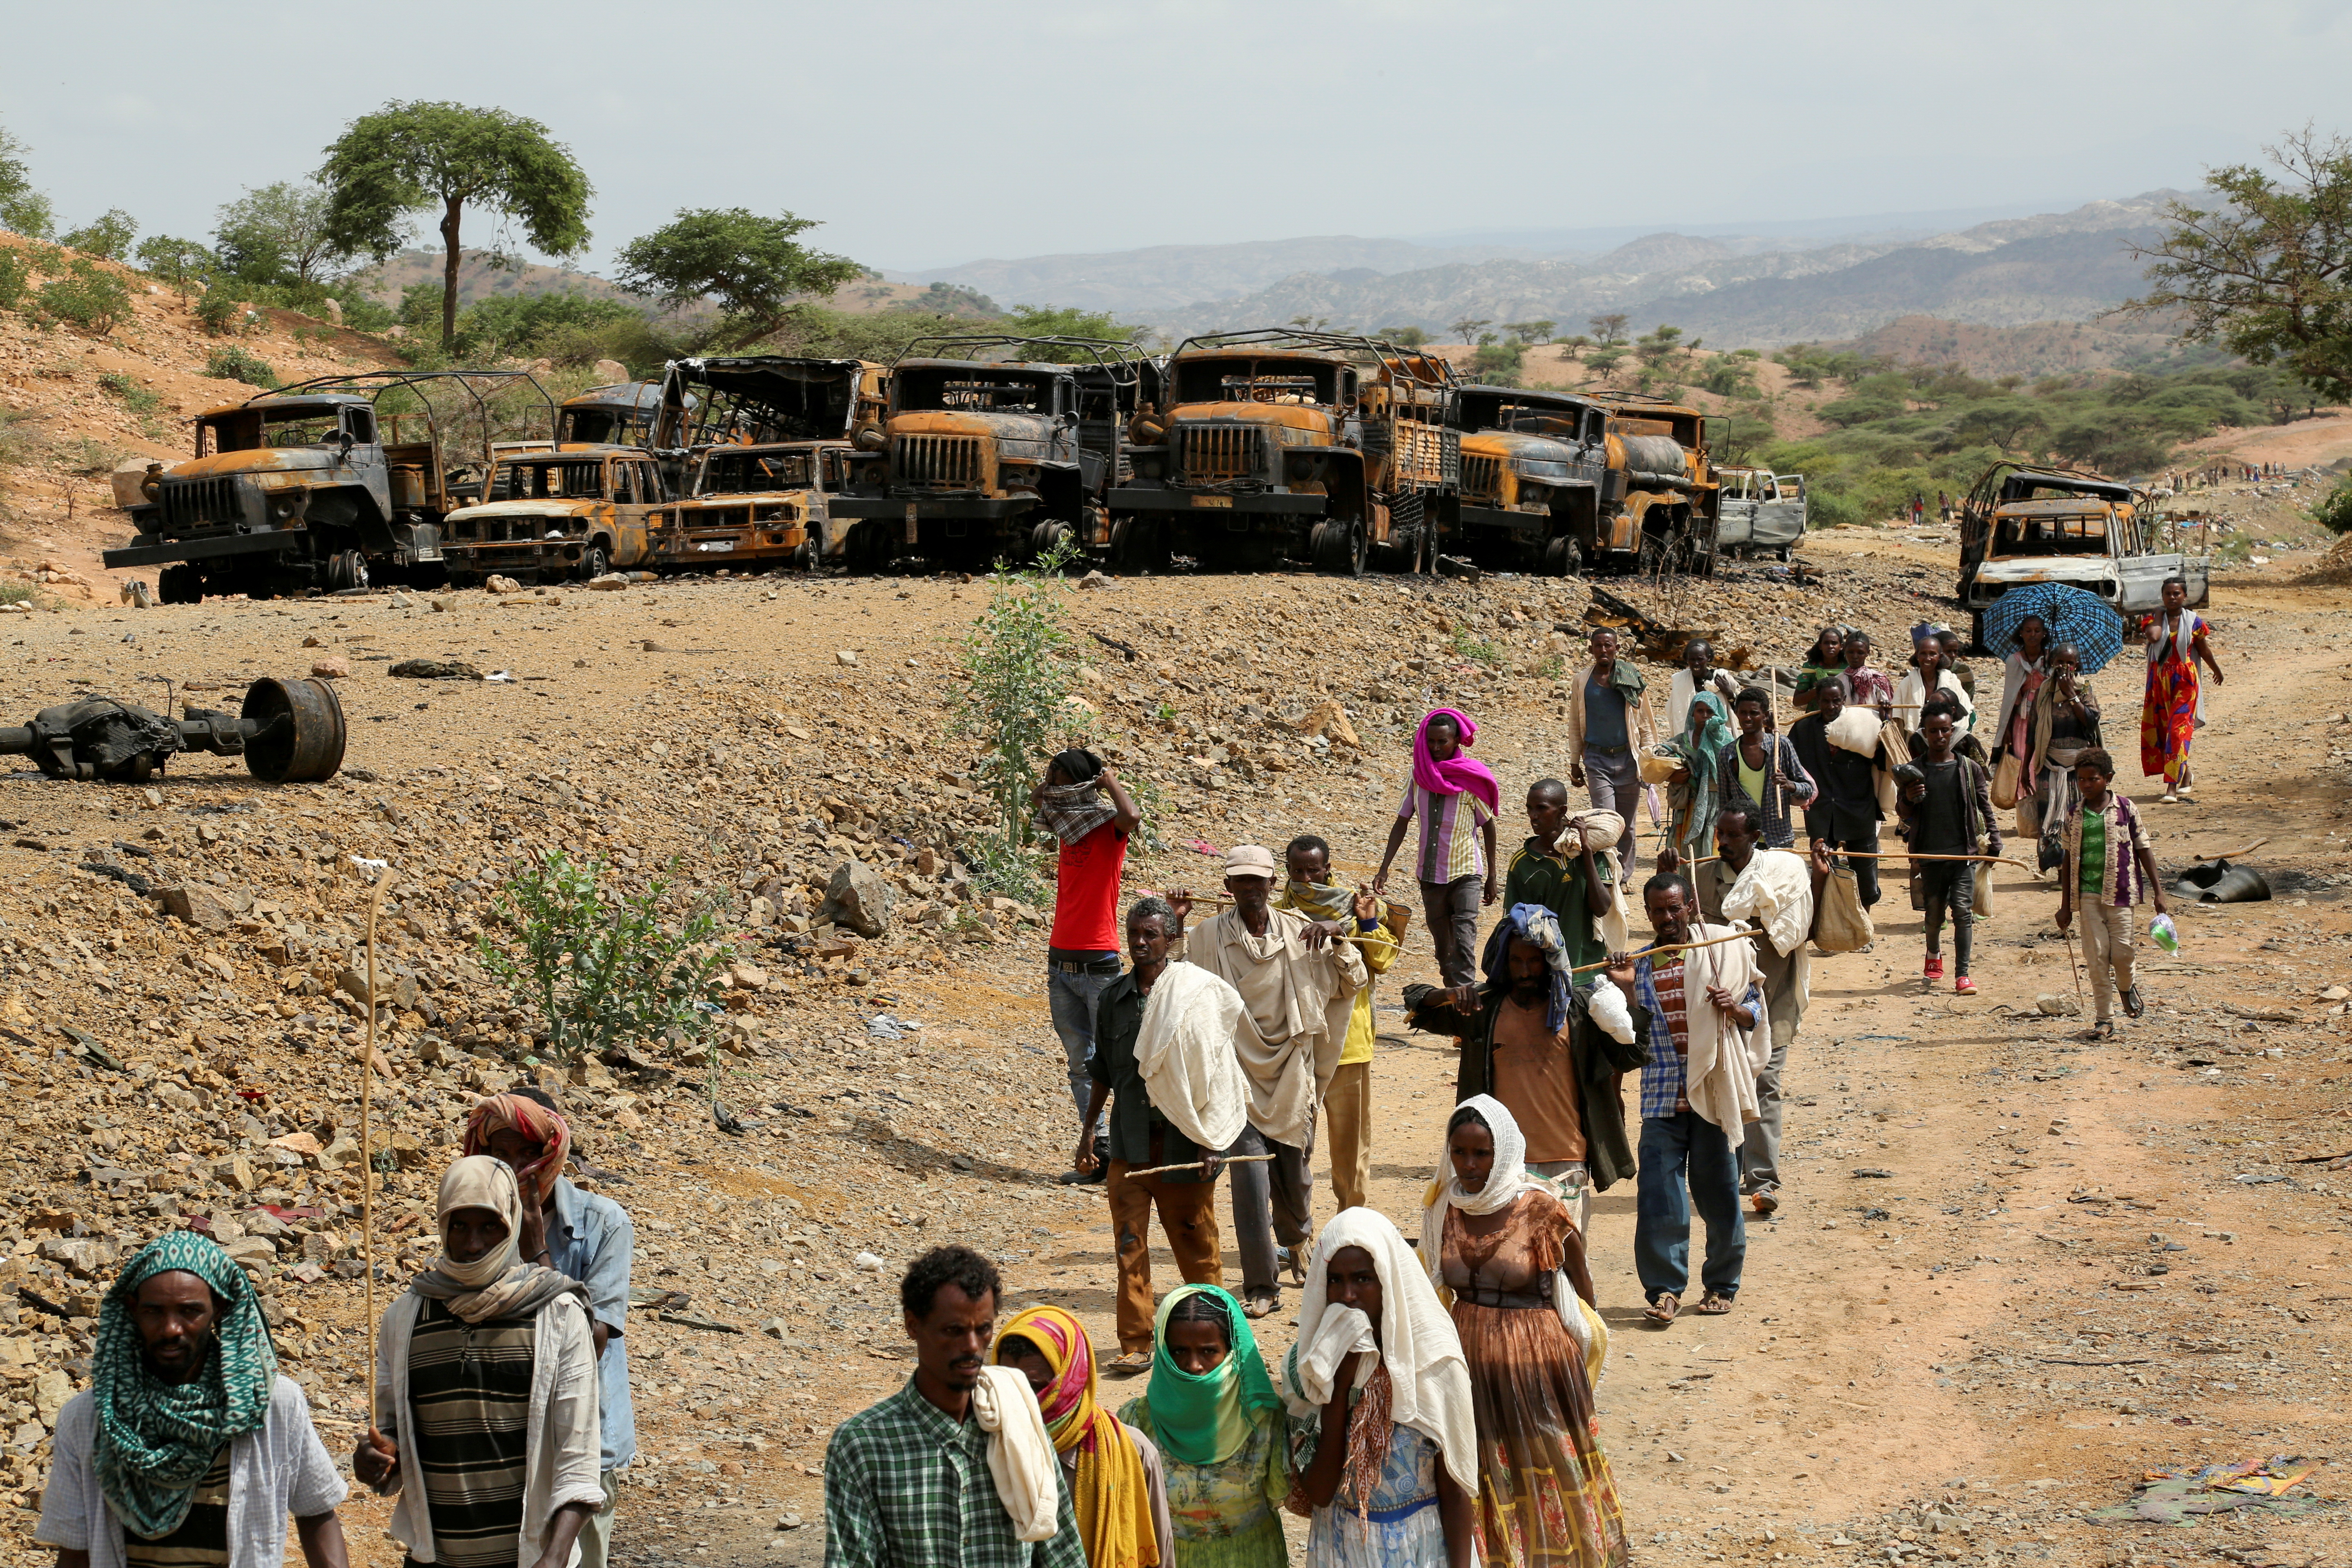 Villagers return from a market to Yechila town in south central Tigray walking past scores of burned vehicles, in Tigray, Ethiopia, July 10, 2021. REUTERS/Giulia Paravicini